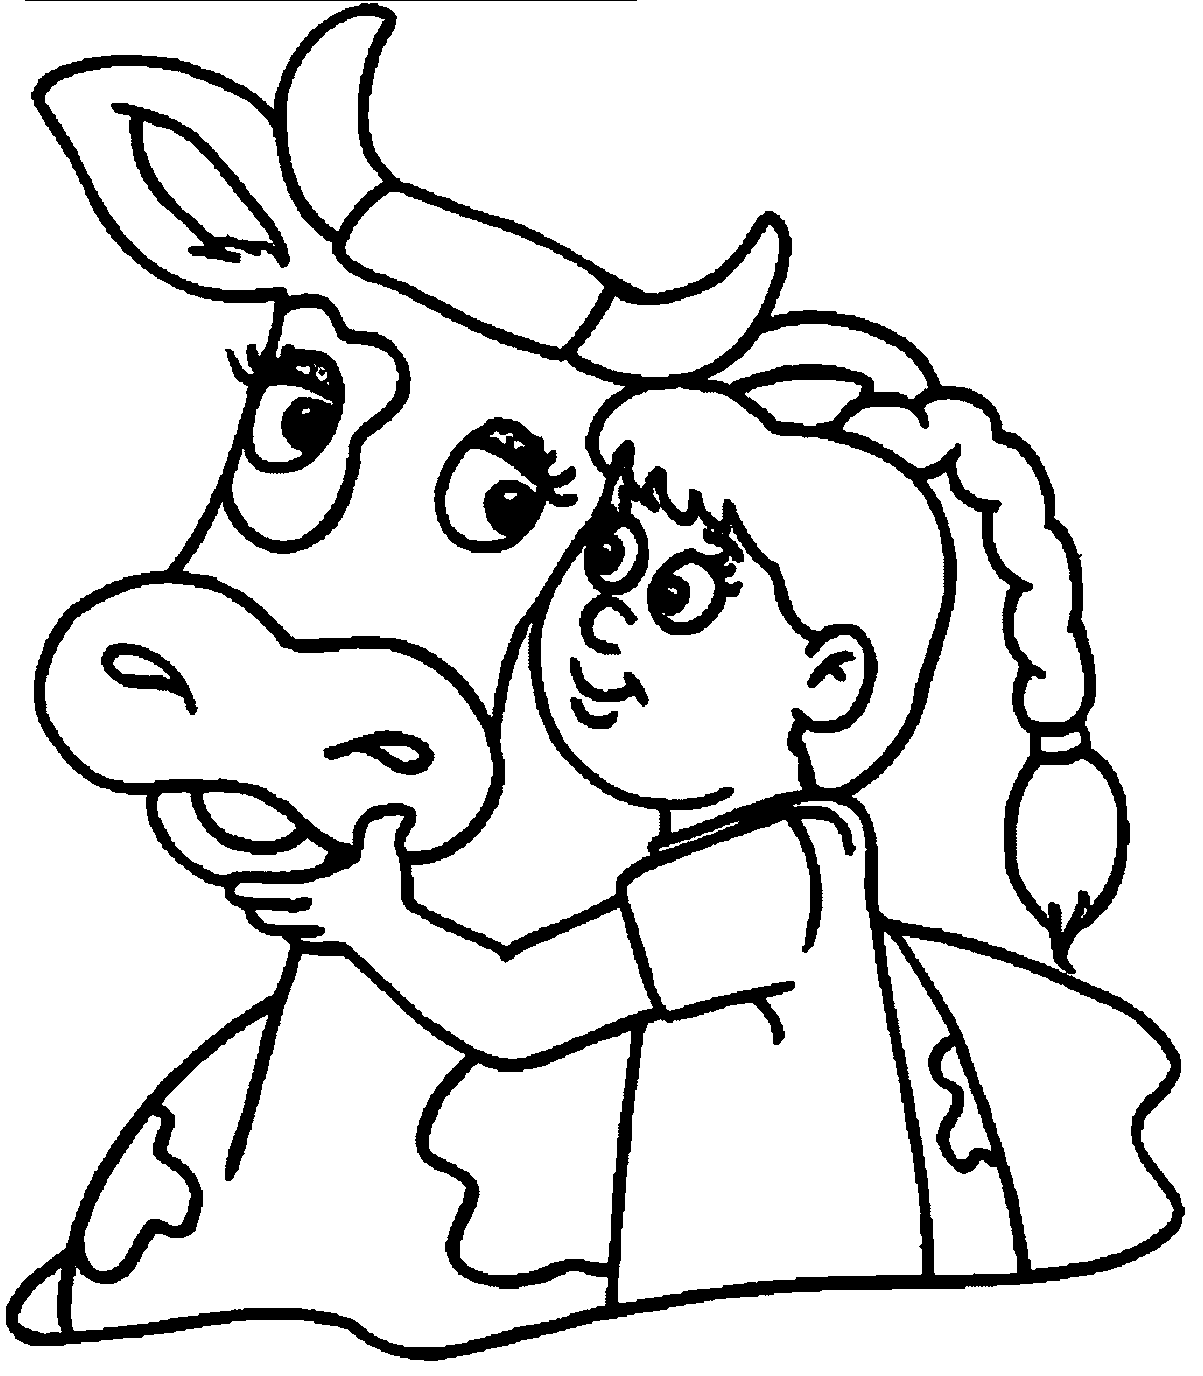 Cow Coloring Pages | Wecoloringpage